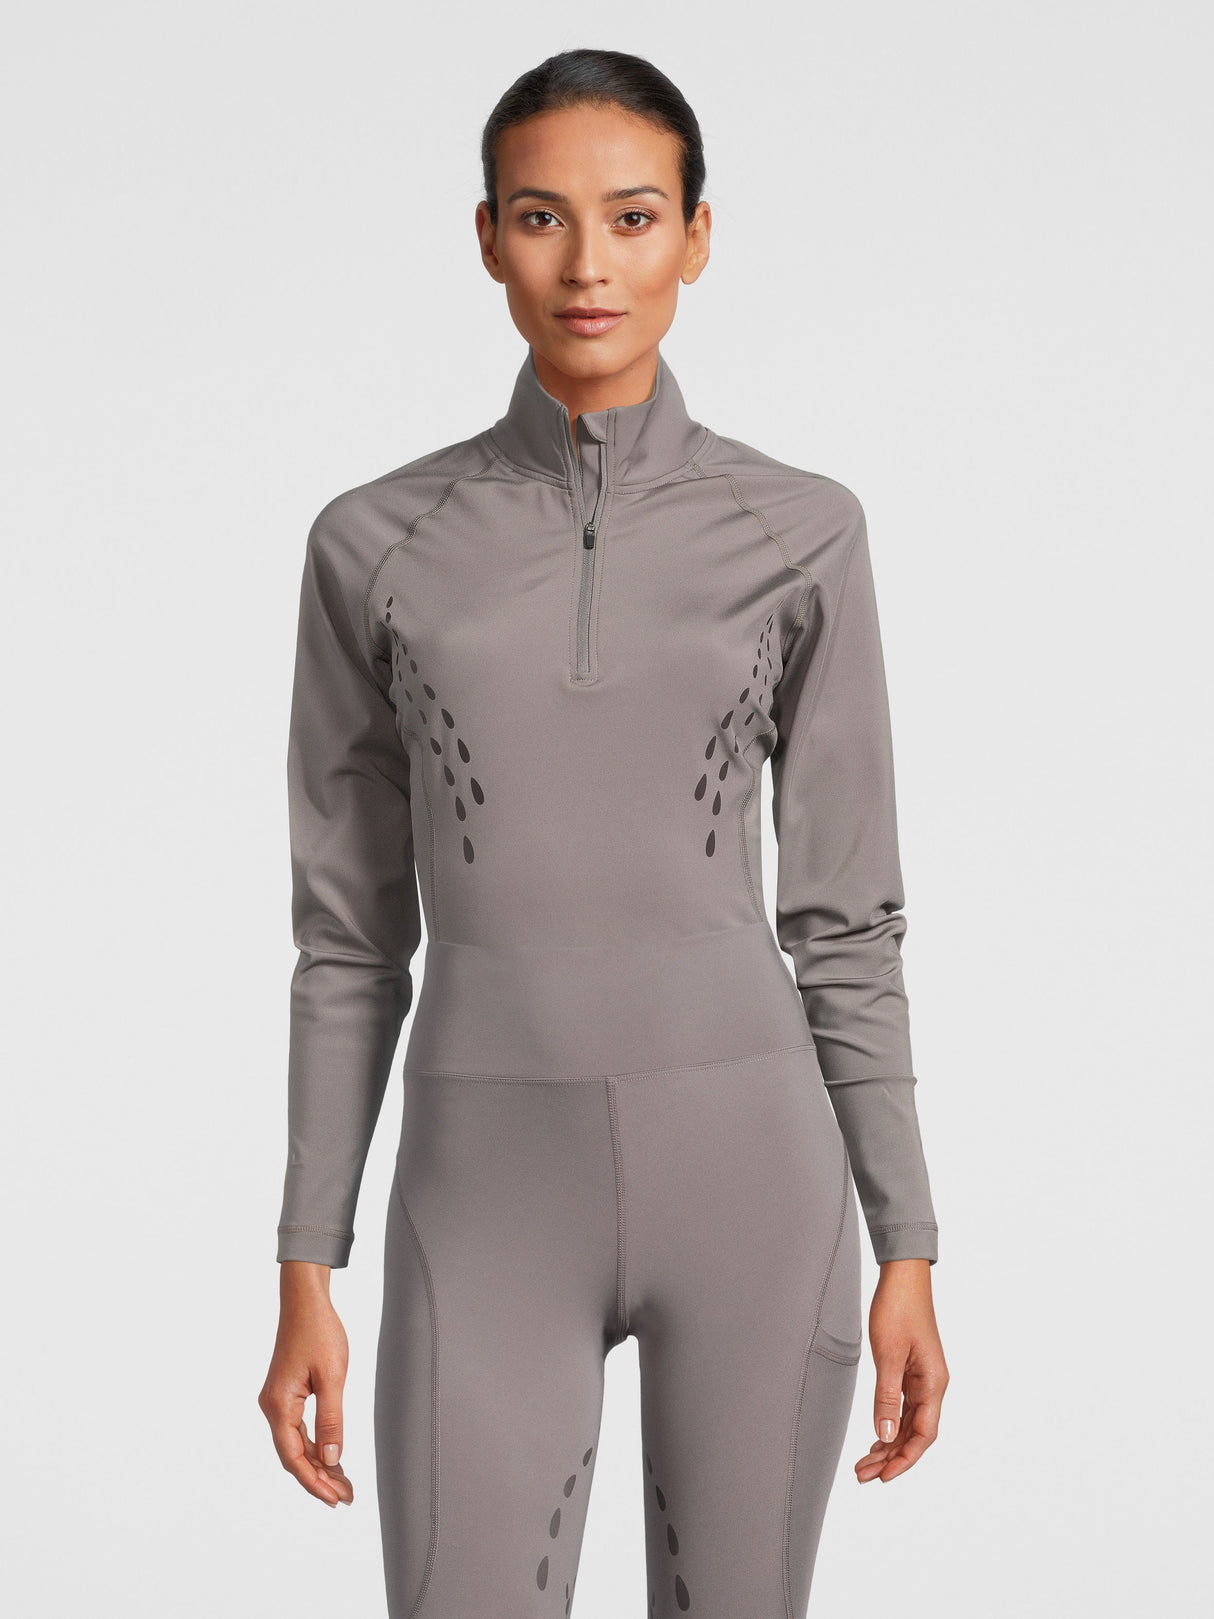 PS of Sweden Tiffany Base Layer Grey